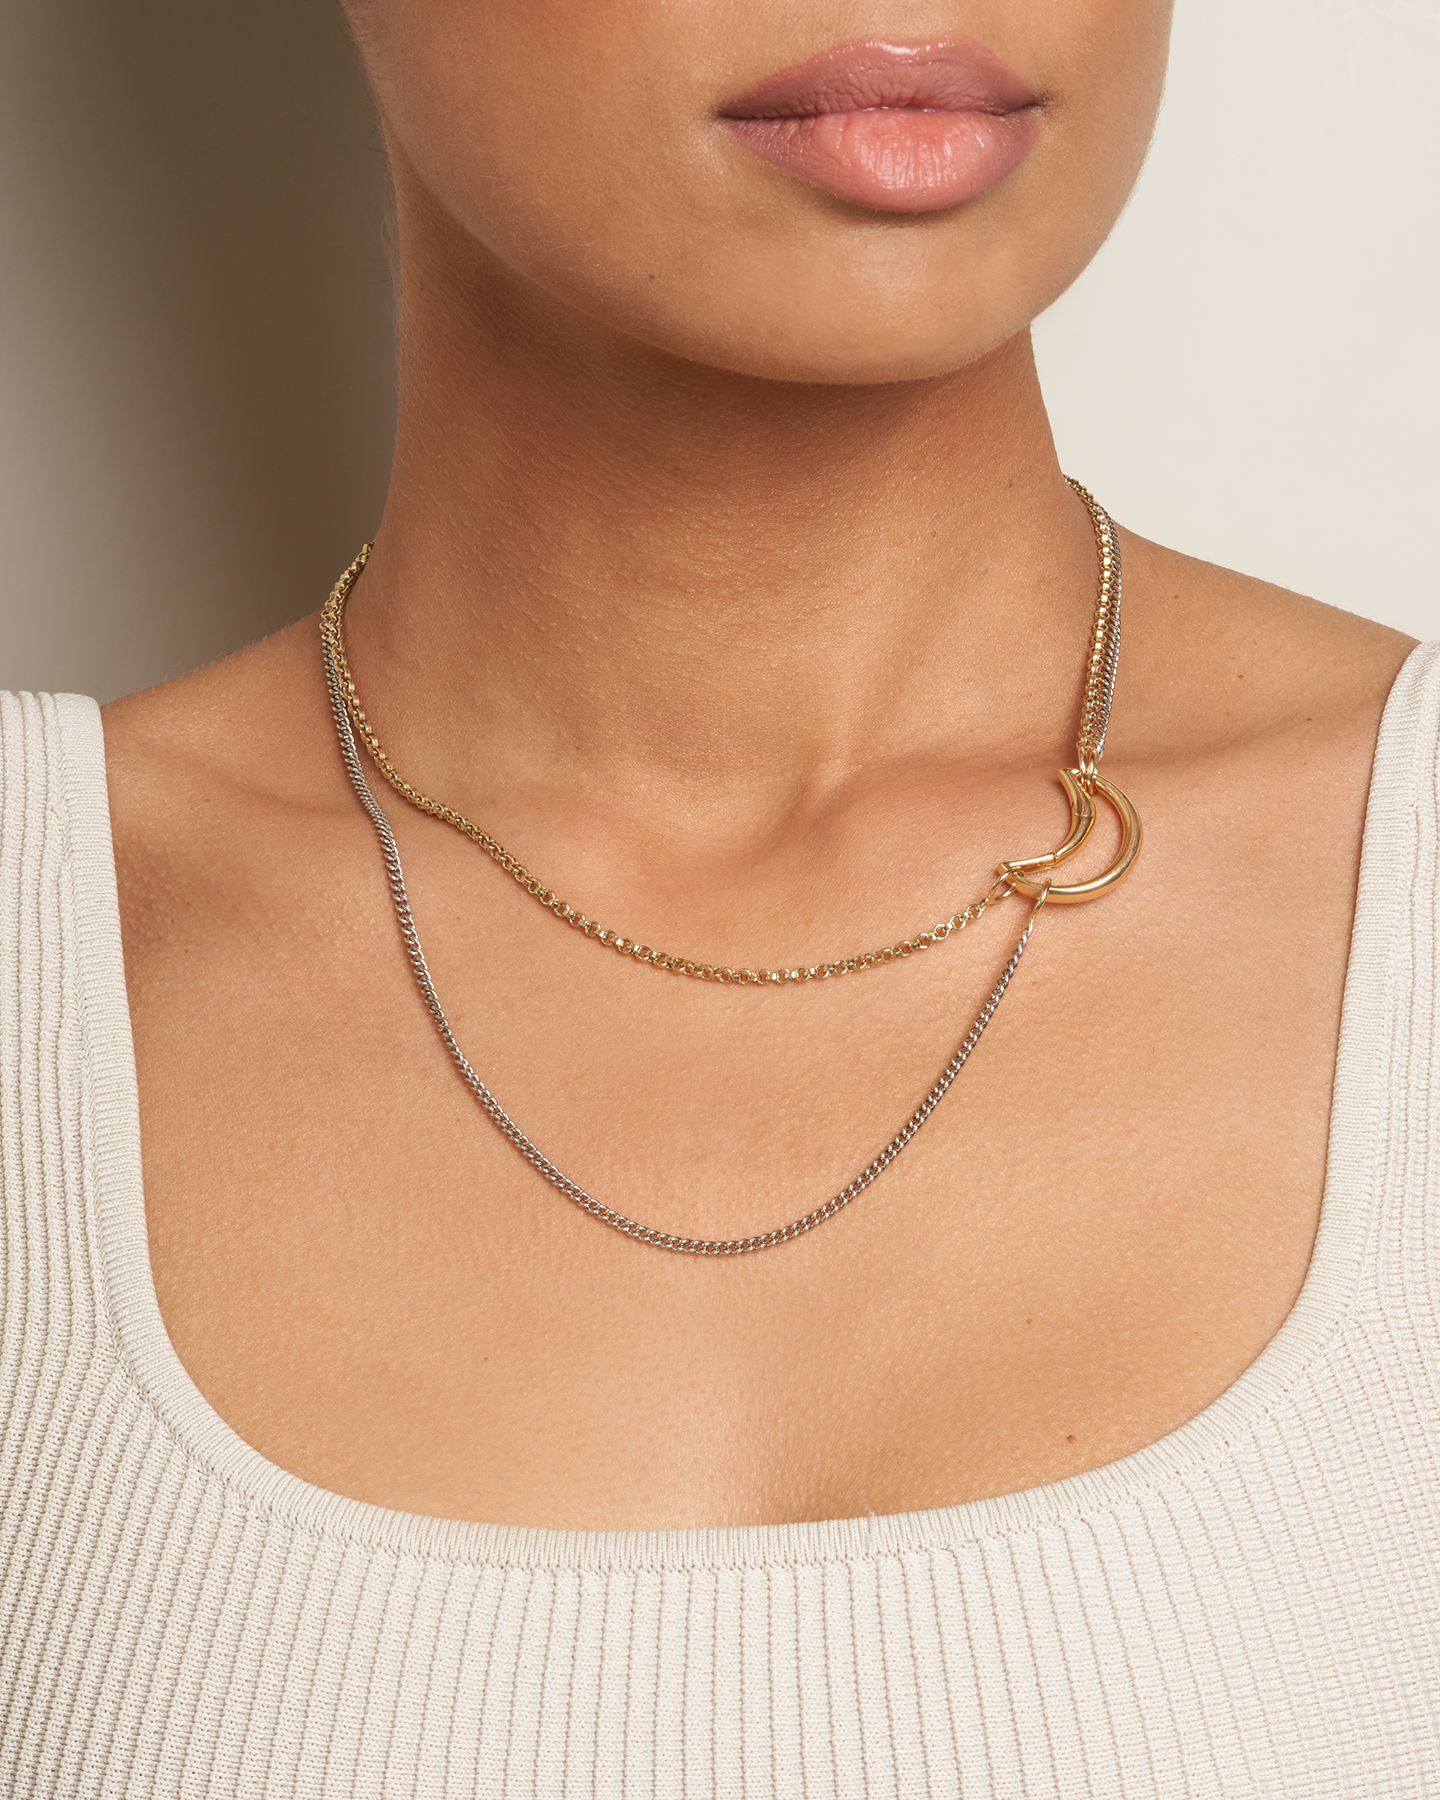 Close up of woman's decolletage wearing gold moon charm attached to two chains